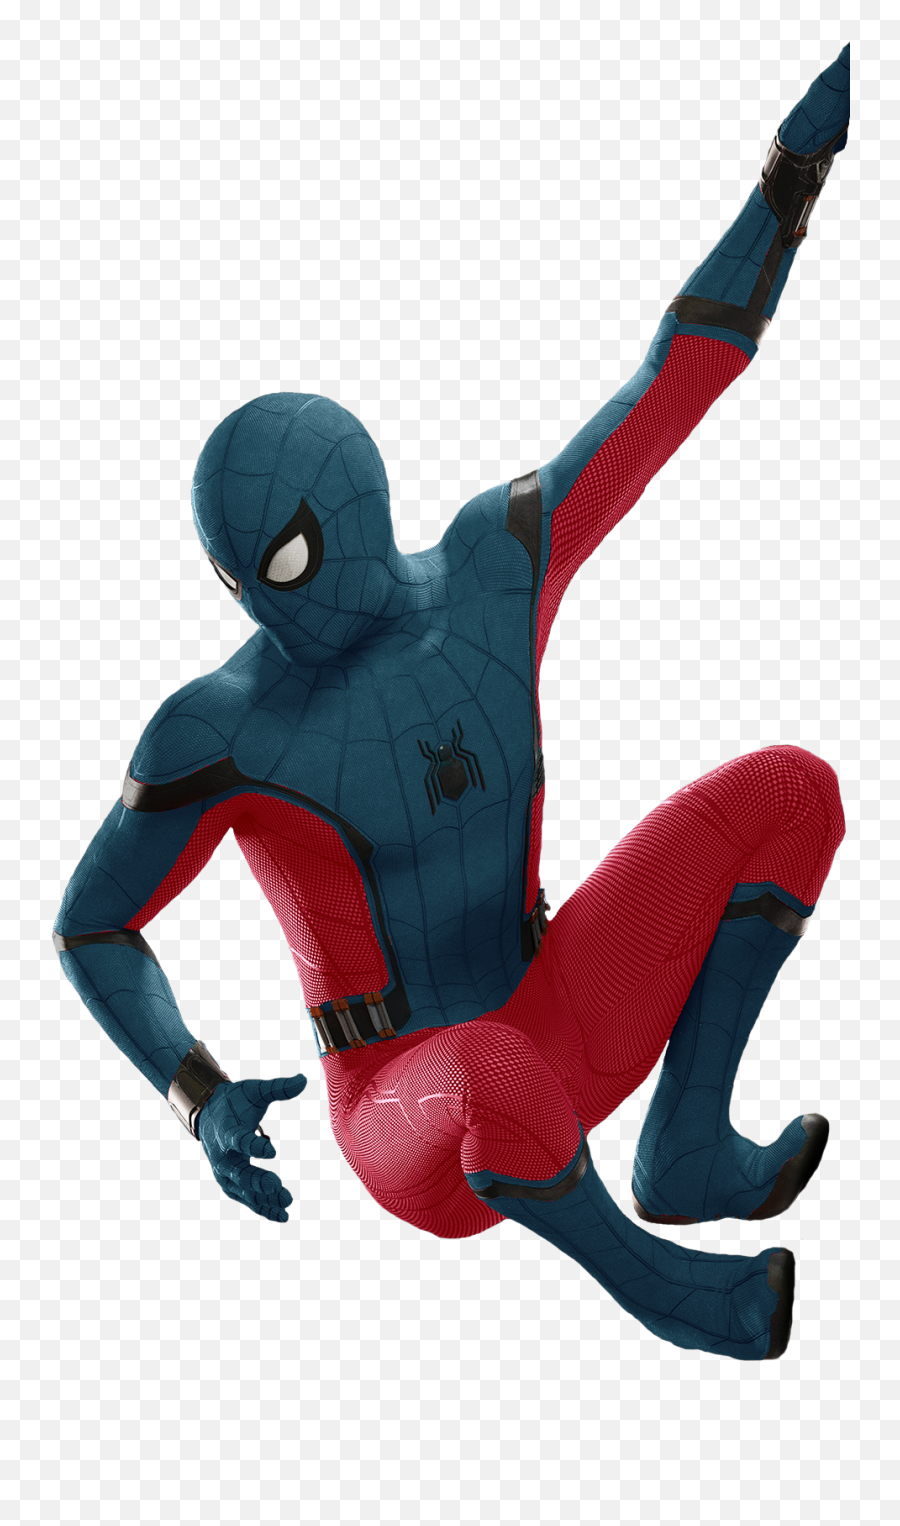 My Girlfriend Sees Red As Blue And - Spider Man Homecoming Png,Spider Man 2099 Logo